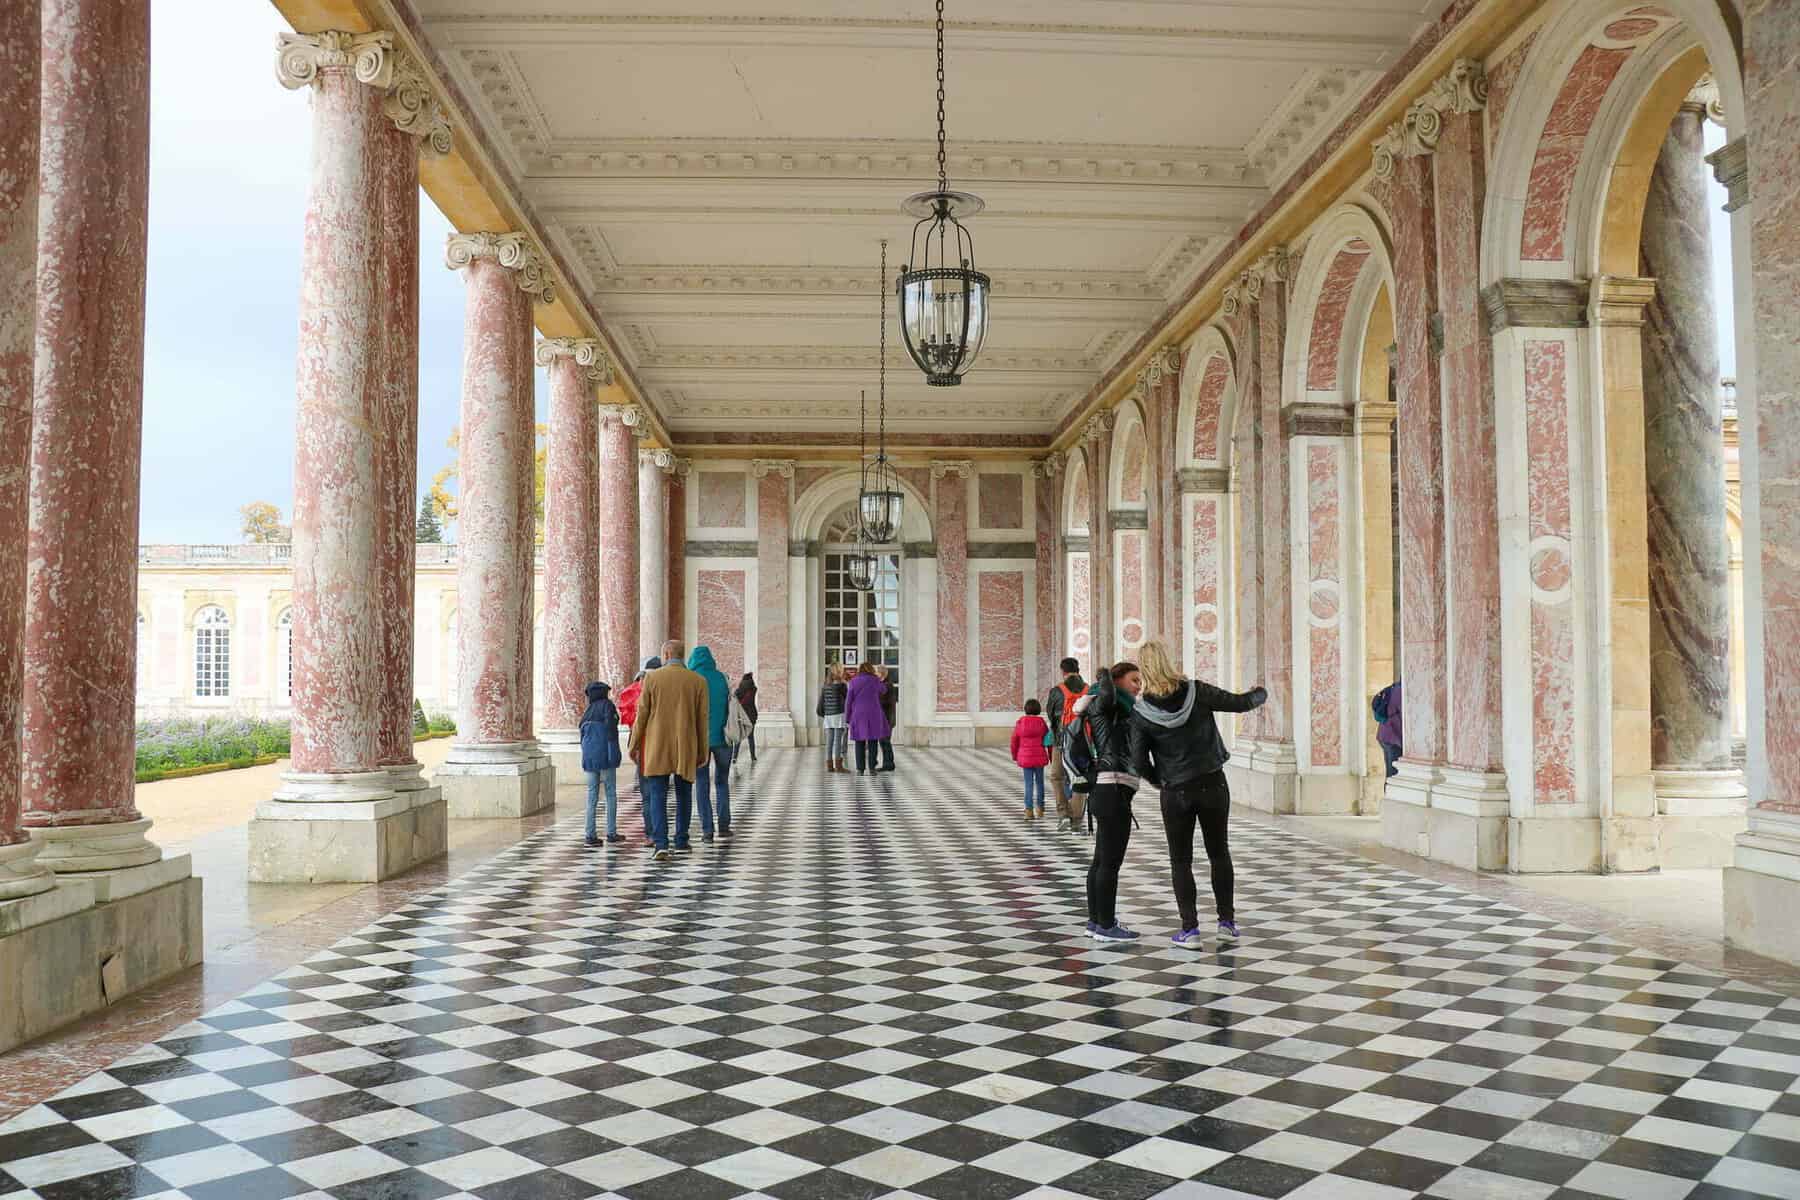 The checkerboard floor lined with archways  that marks the Grand Trianon entrance